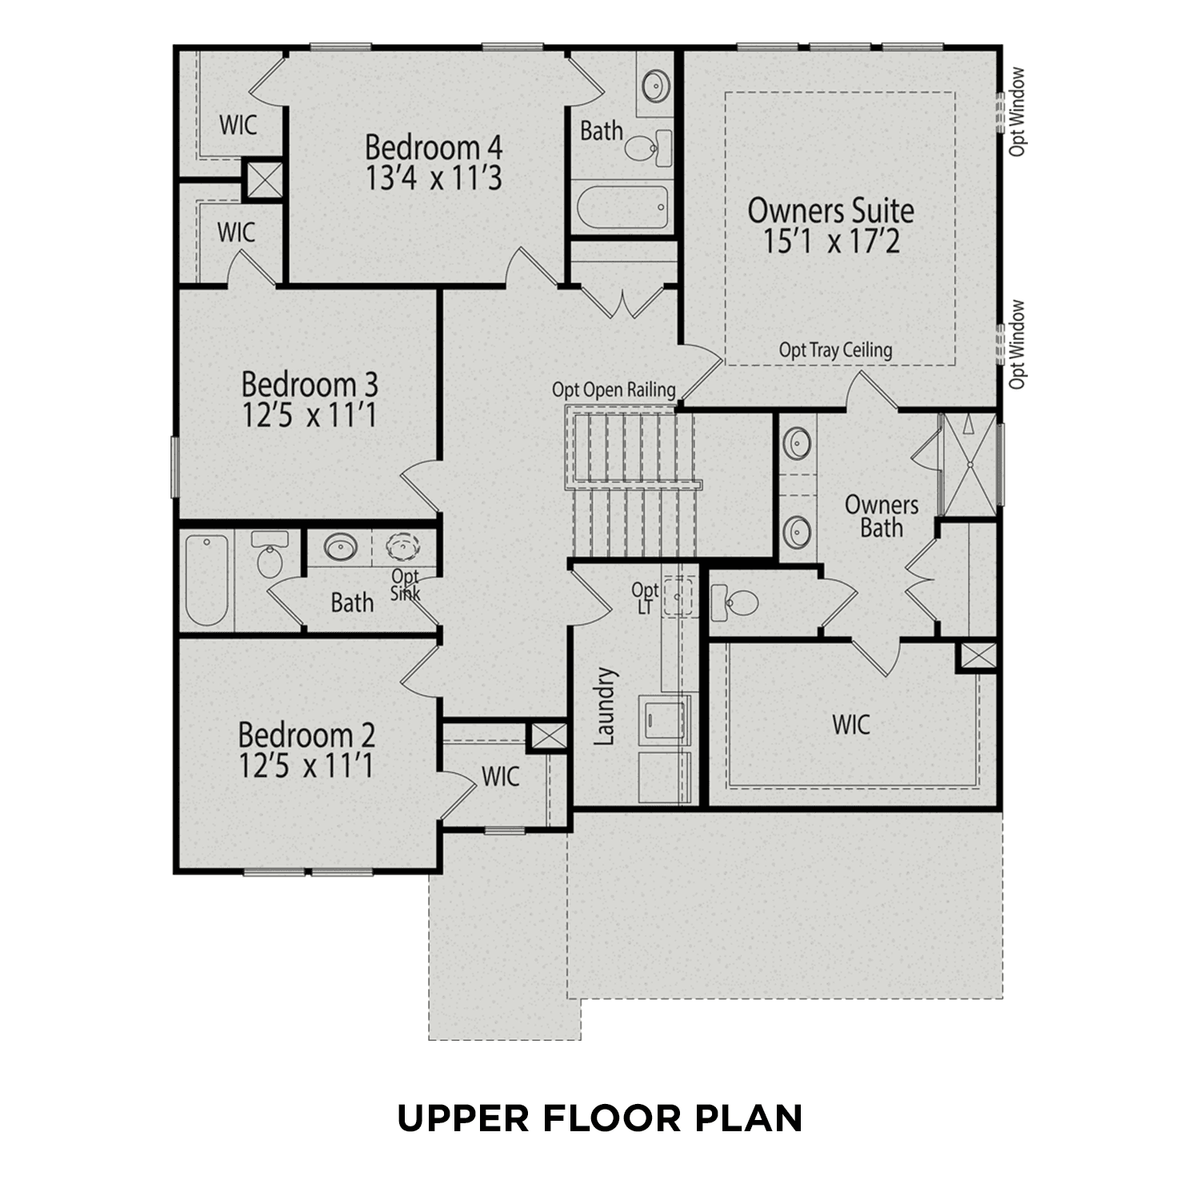 2 - The Hickory F floor plan layout for 649 Craftsman Ridge Trail in Davidson Homes' Glenmere community.